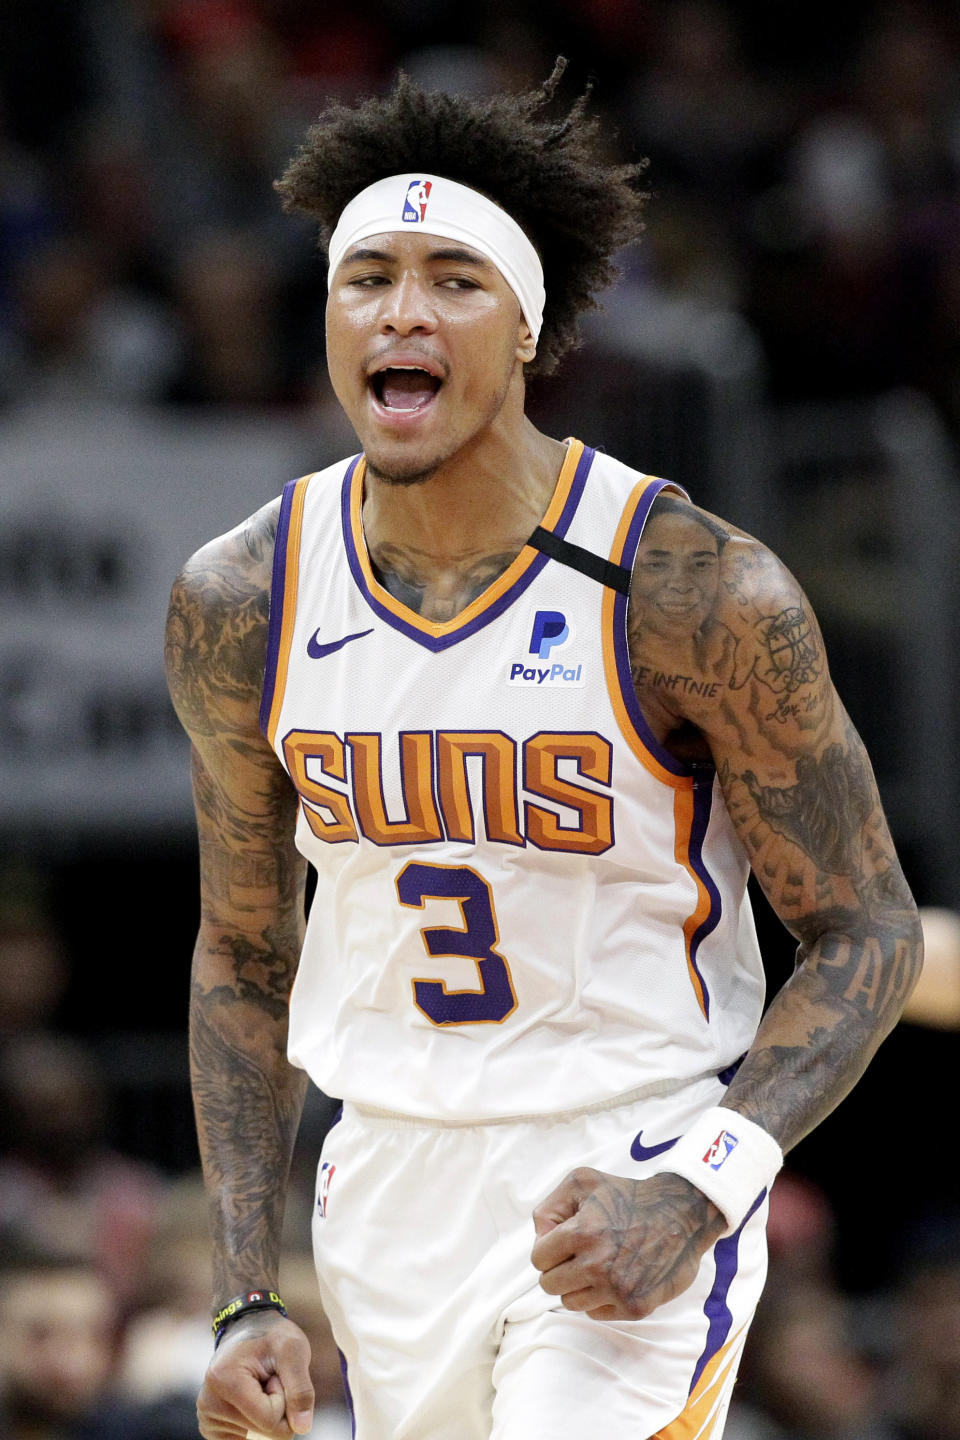 Phoenix Suns forward Kelly Oubre Jr. reacts after scoring during the first half of the team's NBA basketball game against the Chicago Bulls in Chicago, Saturday, Feb. 22, 2020. (AP Photo/Nam Y. Huh)